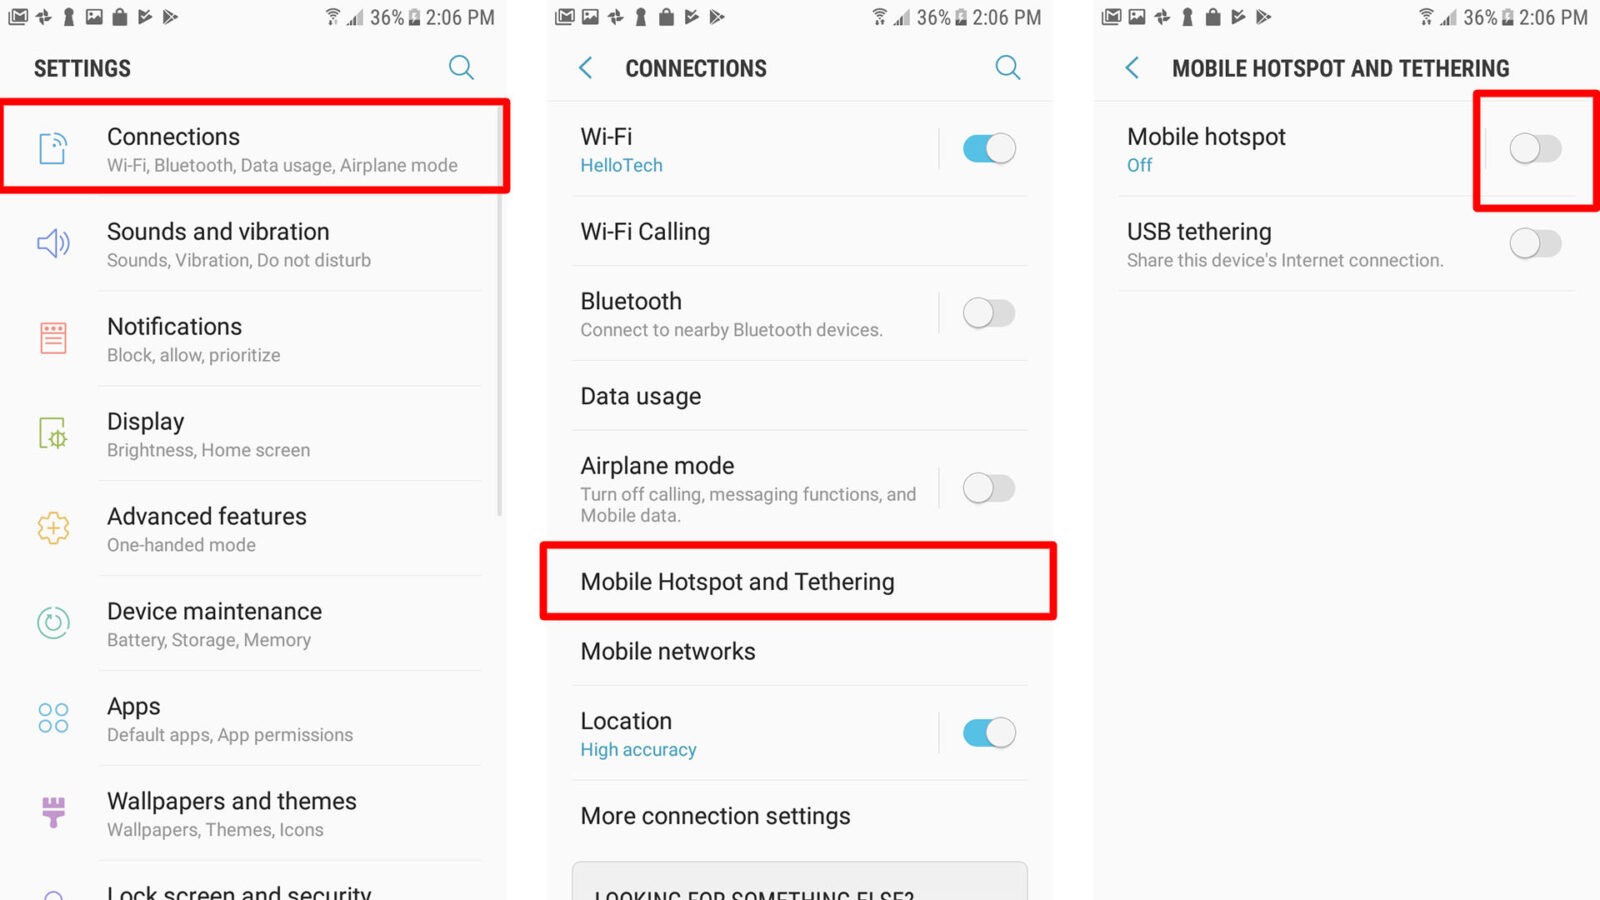 How to Turn on a Mobile Hotspot on Android